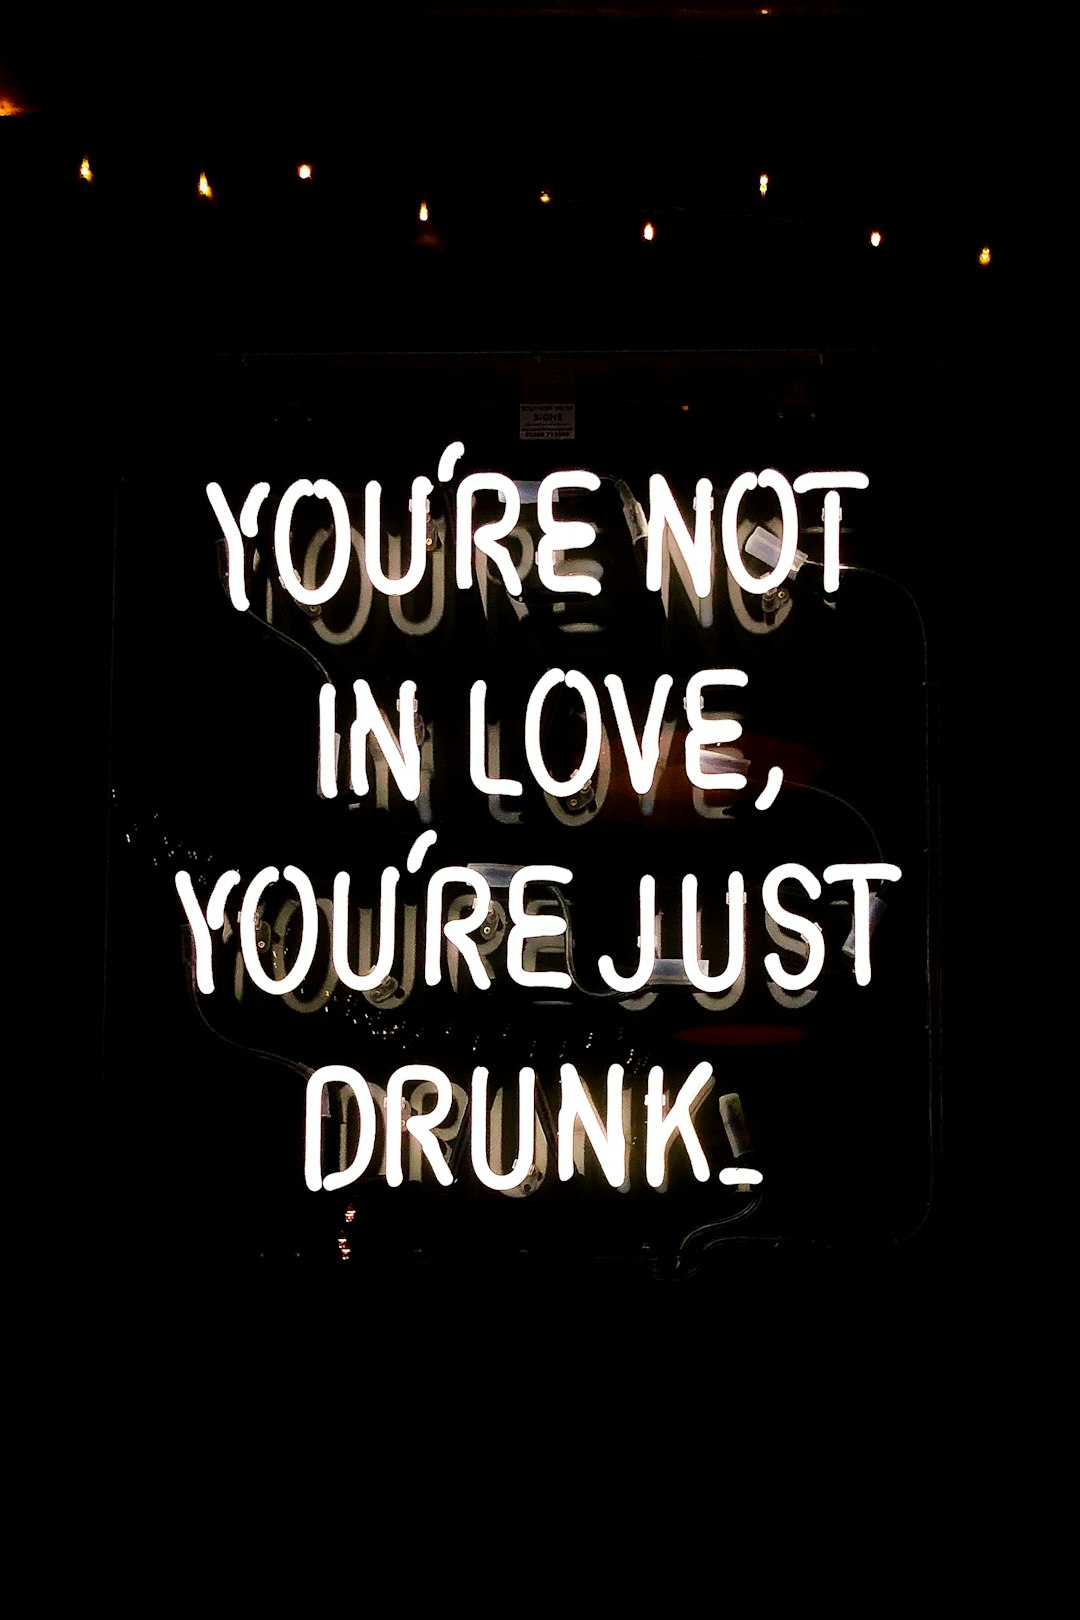 love drunk and intoxicated. mistakes.
